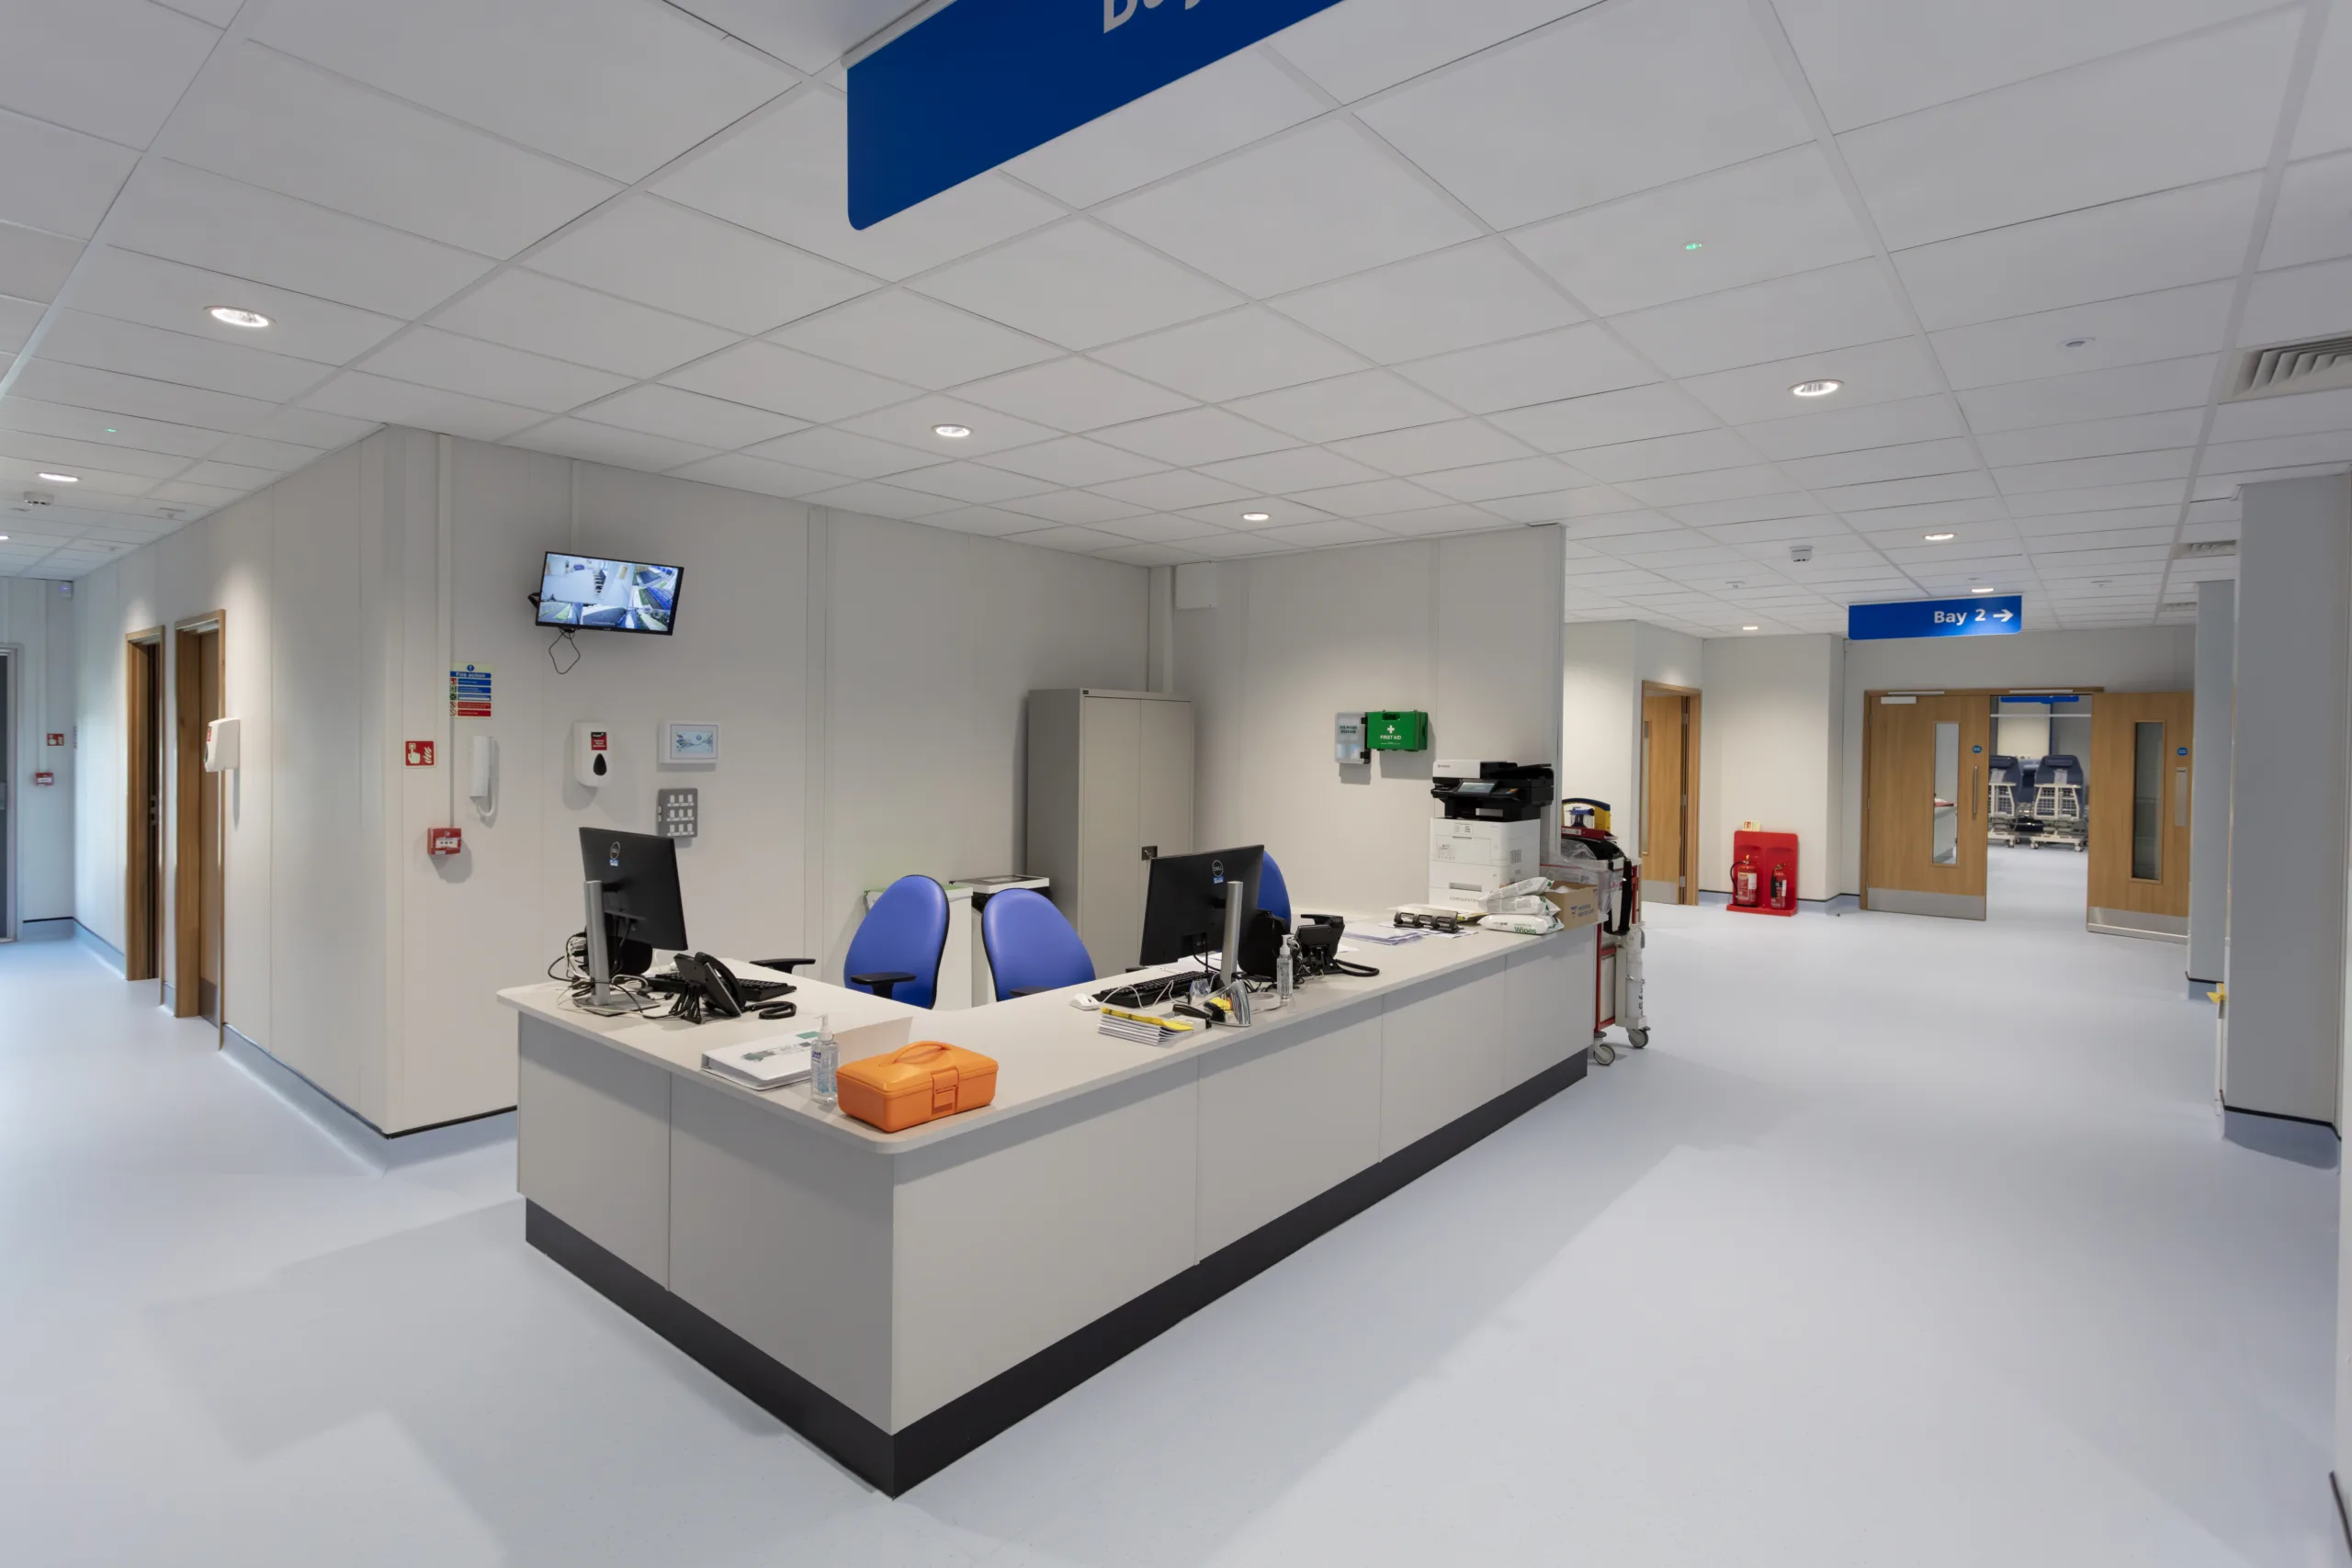 A photograph of the inside of Fareham Community Hospital, a Portakabin project. The photo shows a reception or nurse's station with a wide corridor leading away